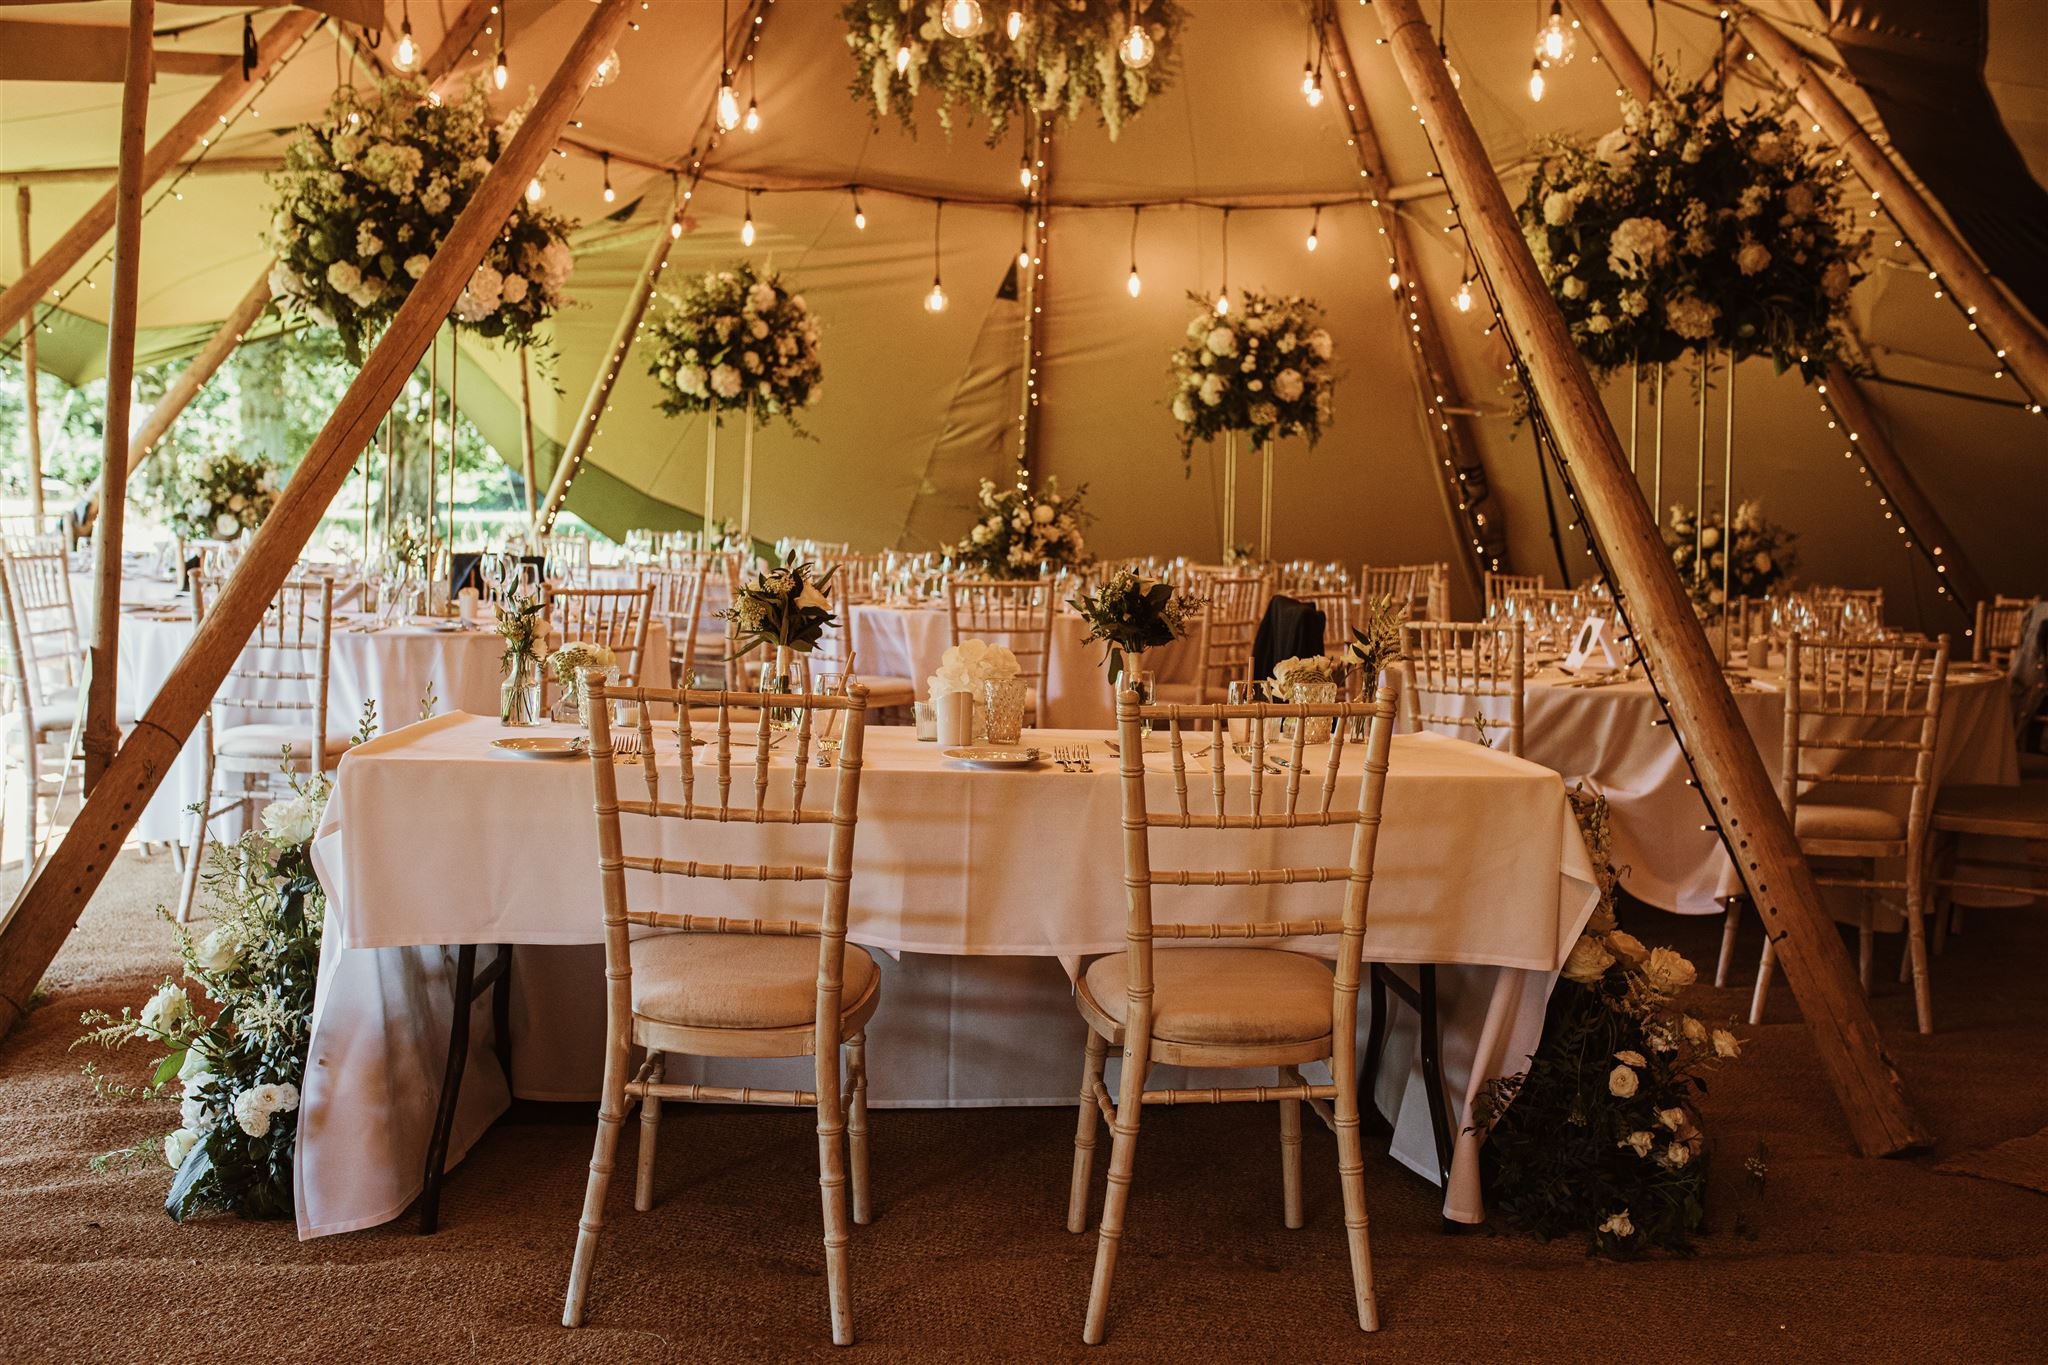 White wedding floral decorations in tipi